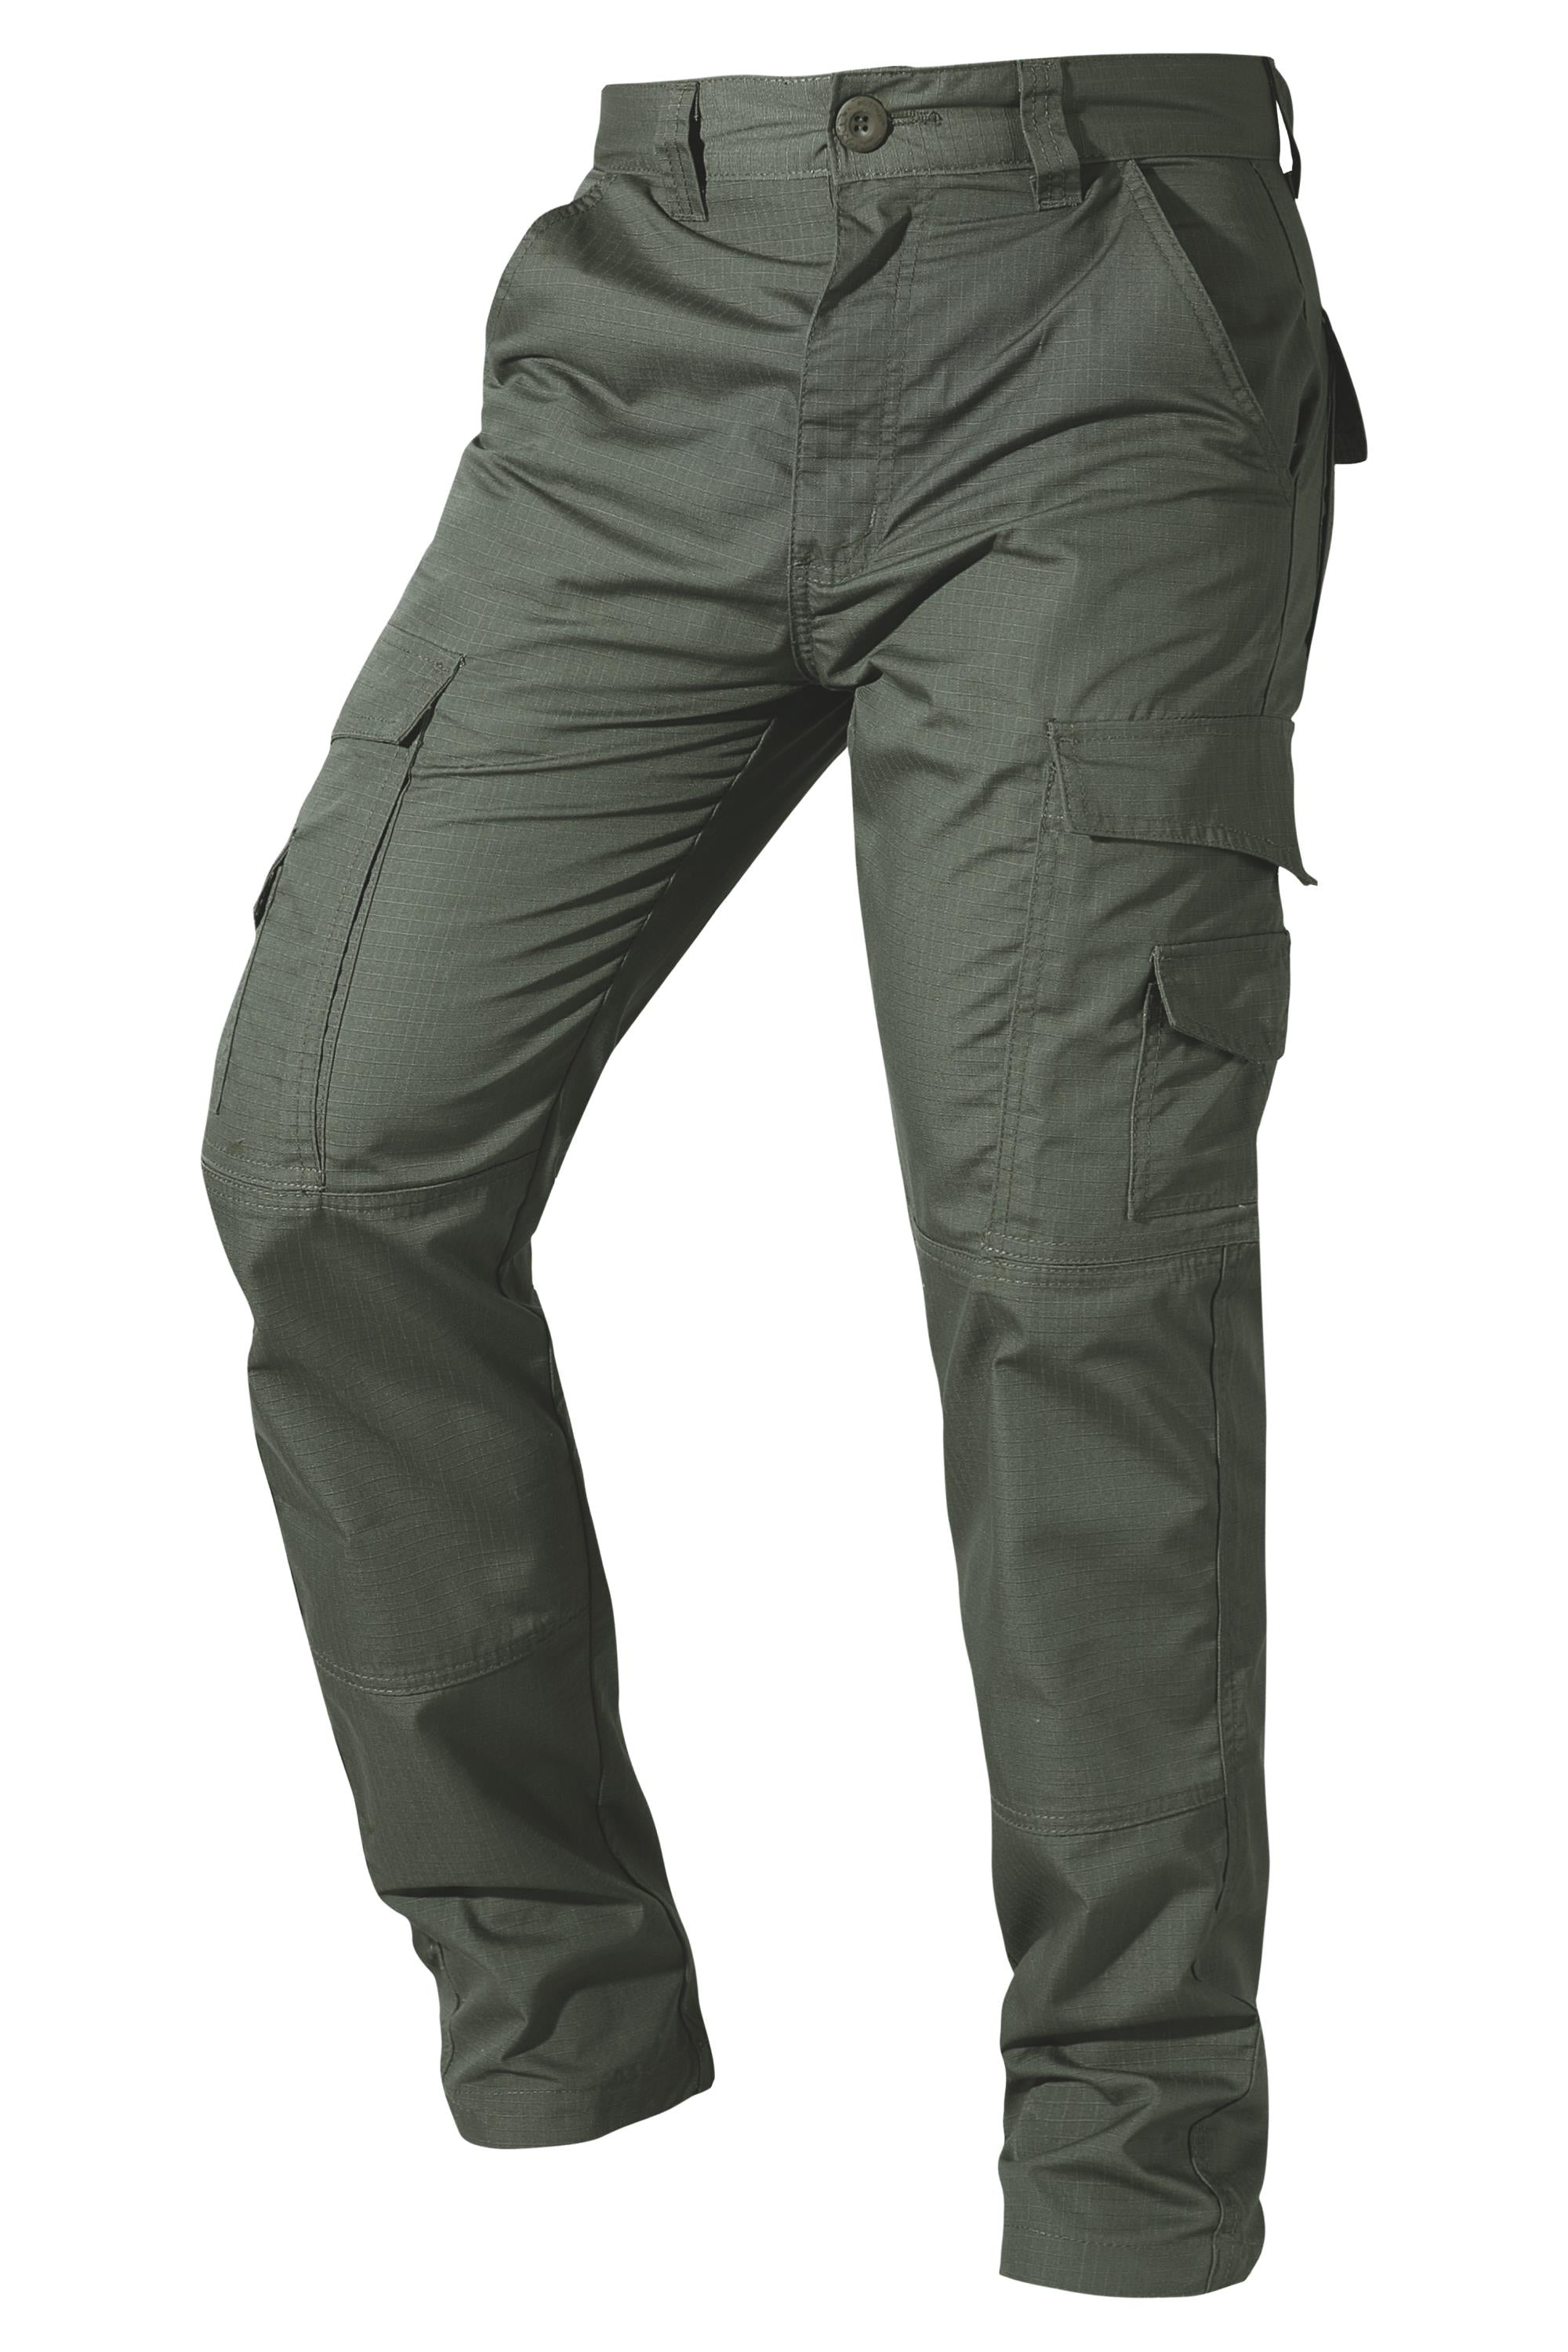 STEEL RUGGED FLEX™ RELAXED FIT DOUBLE-FRONT CARGO MULTI-POCKET WORK PANT |  Carhartt®